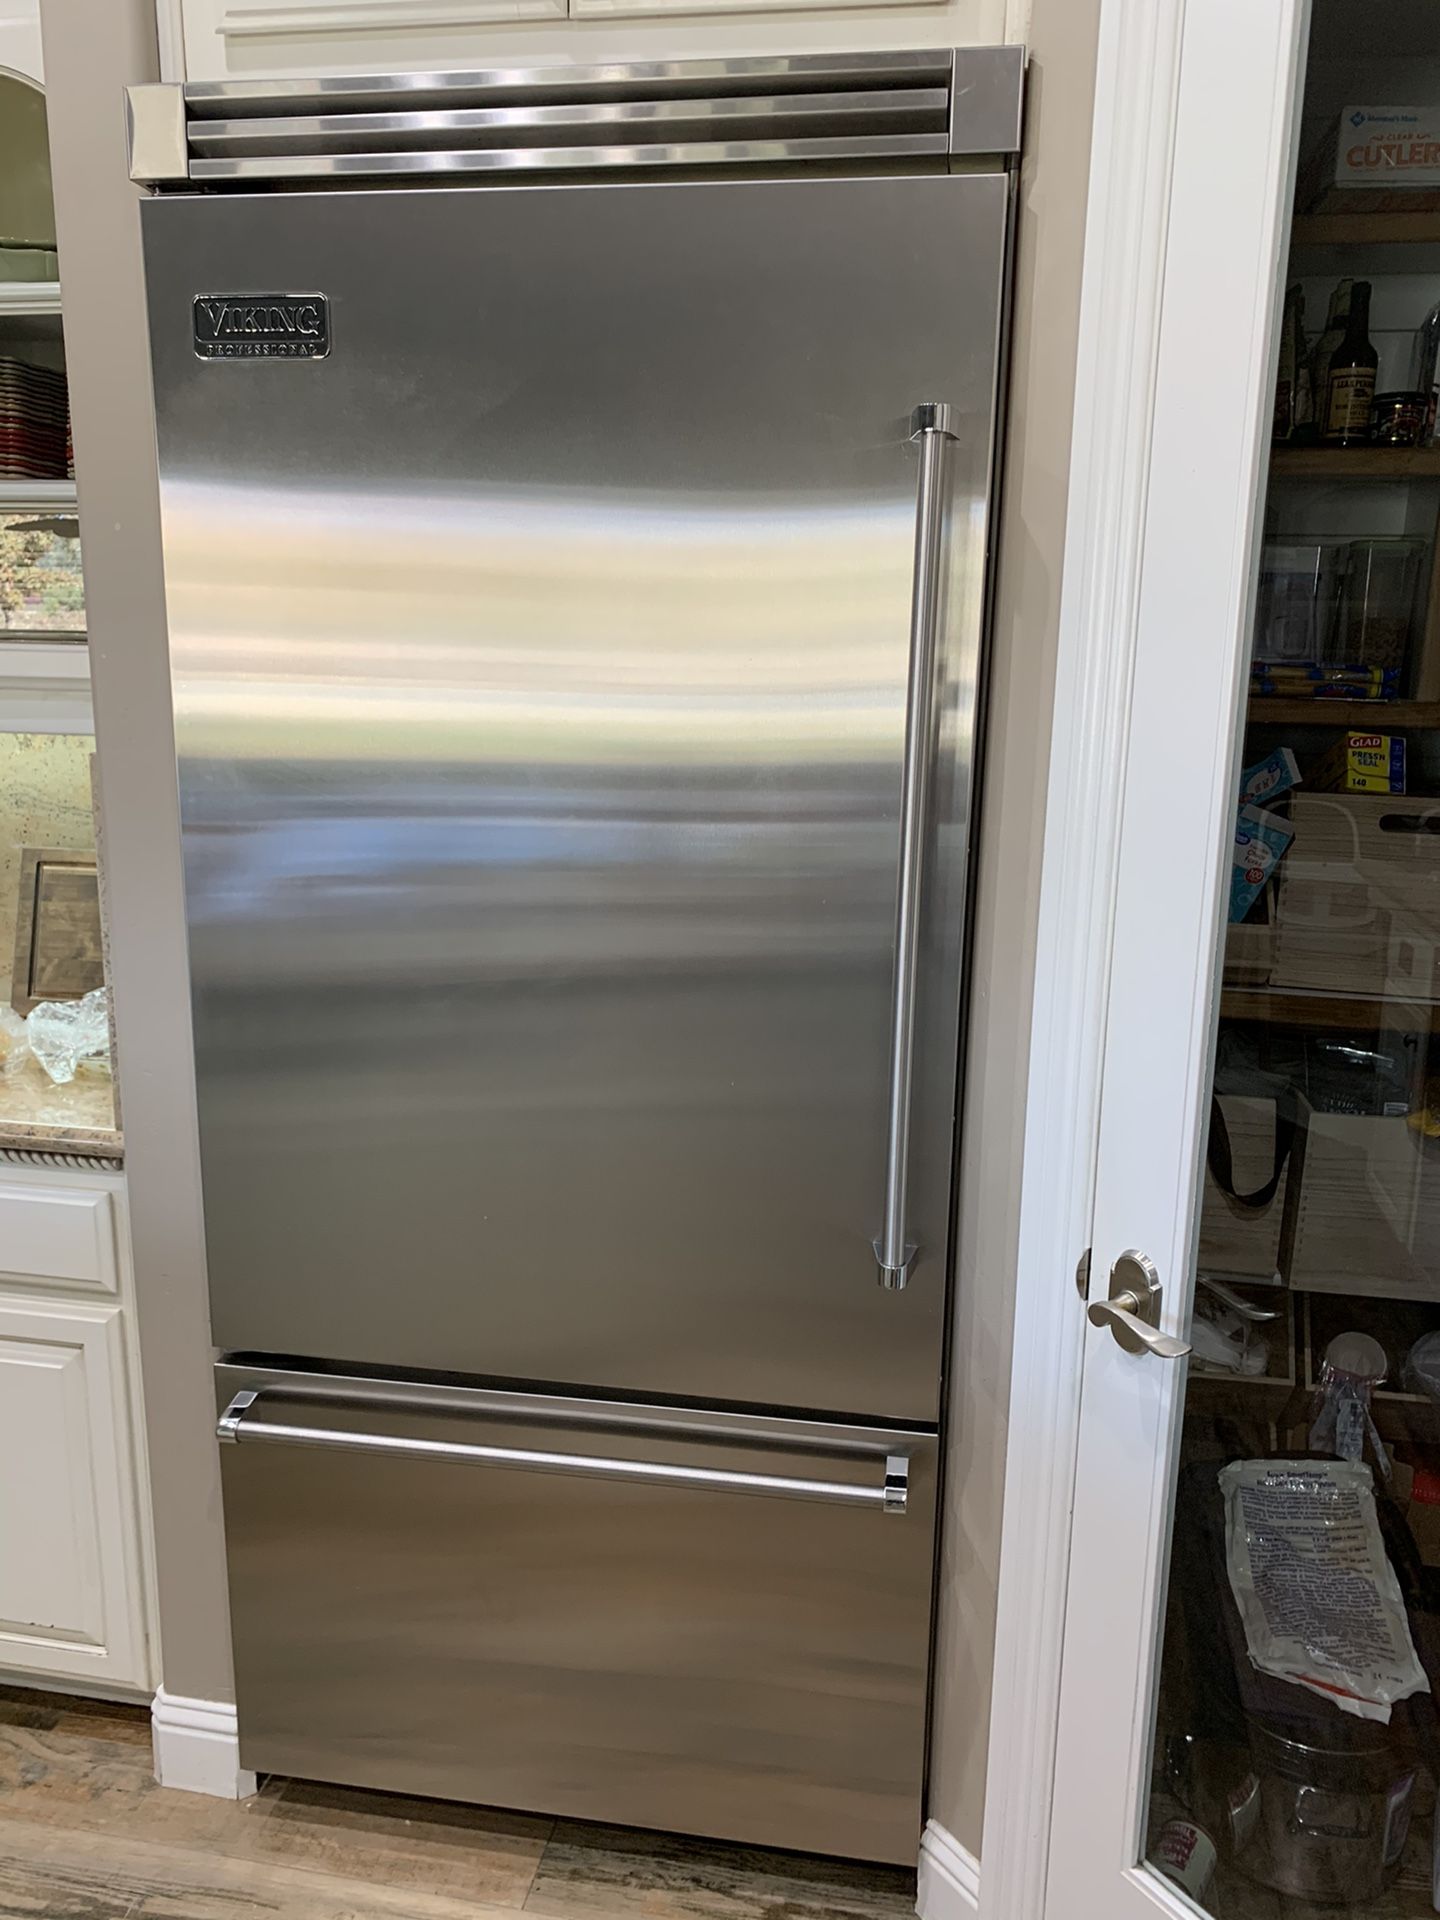 Viking 36” Built-in Professional Refrigerator/ Freezer No Visible Scratches Or Dents